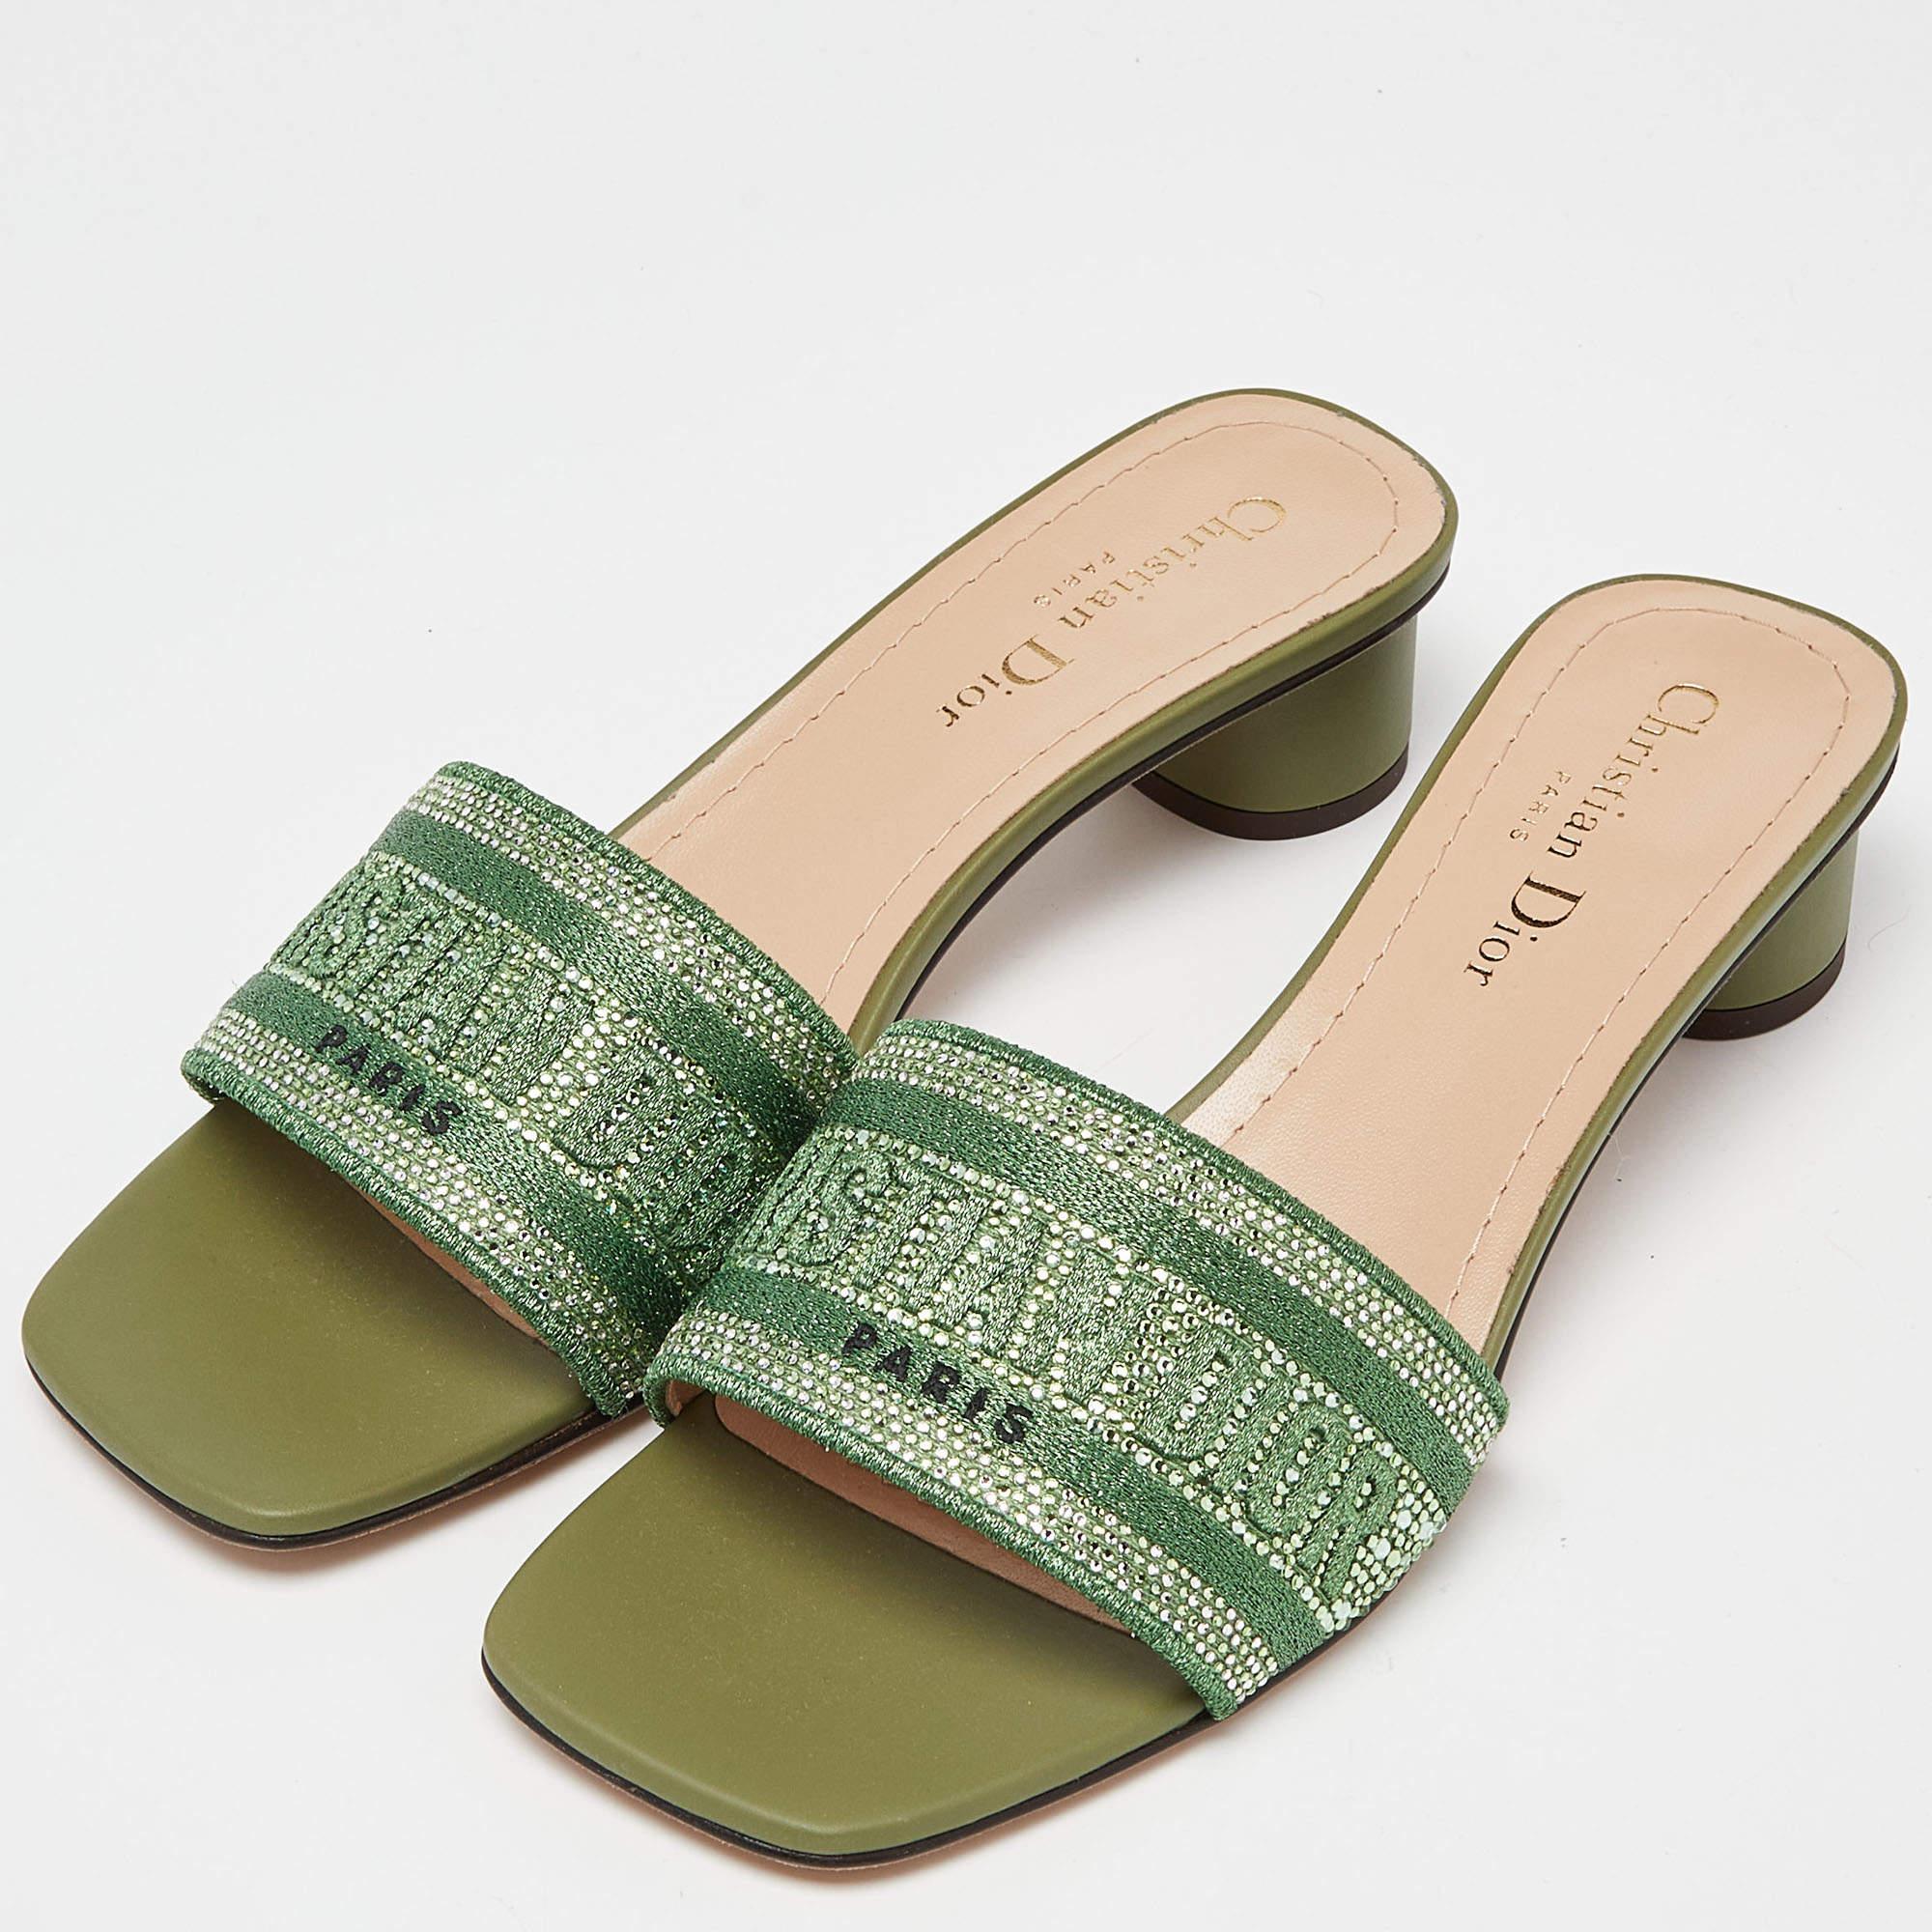 These sandals will frame your feet in an elegant manner. Crafted from quality materials, they display a classy design and comfortable insoles.

Includes: Original Dustbag, Branded Box